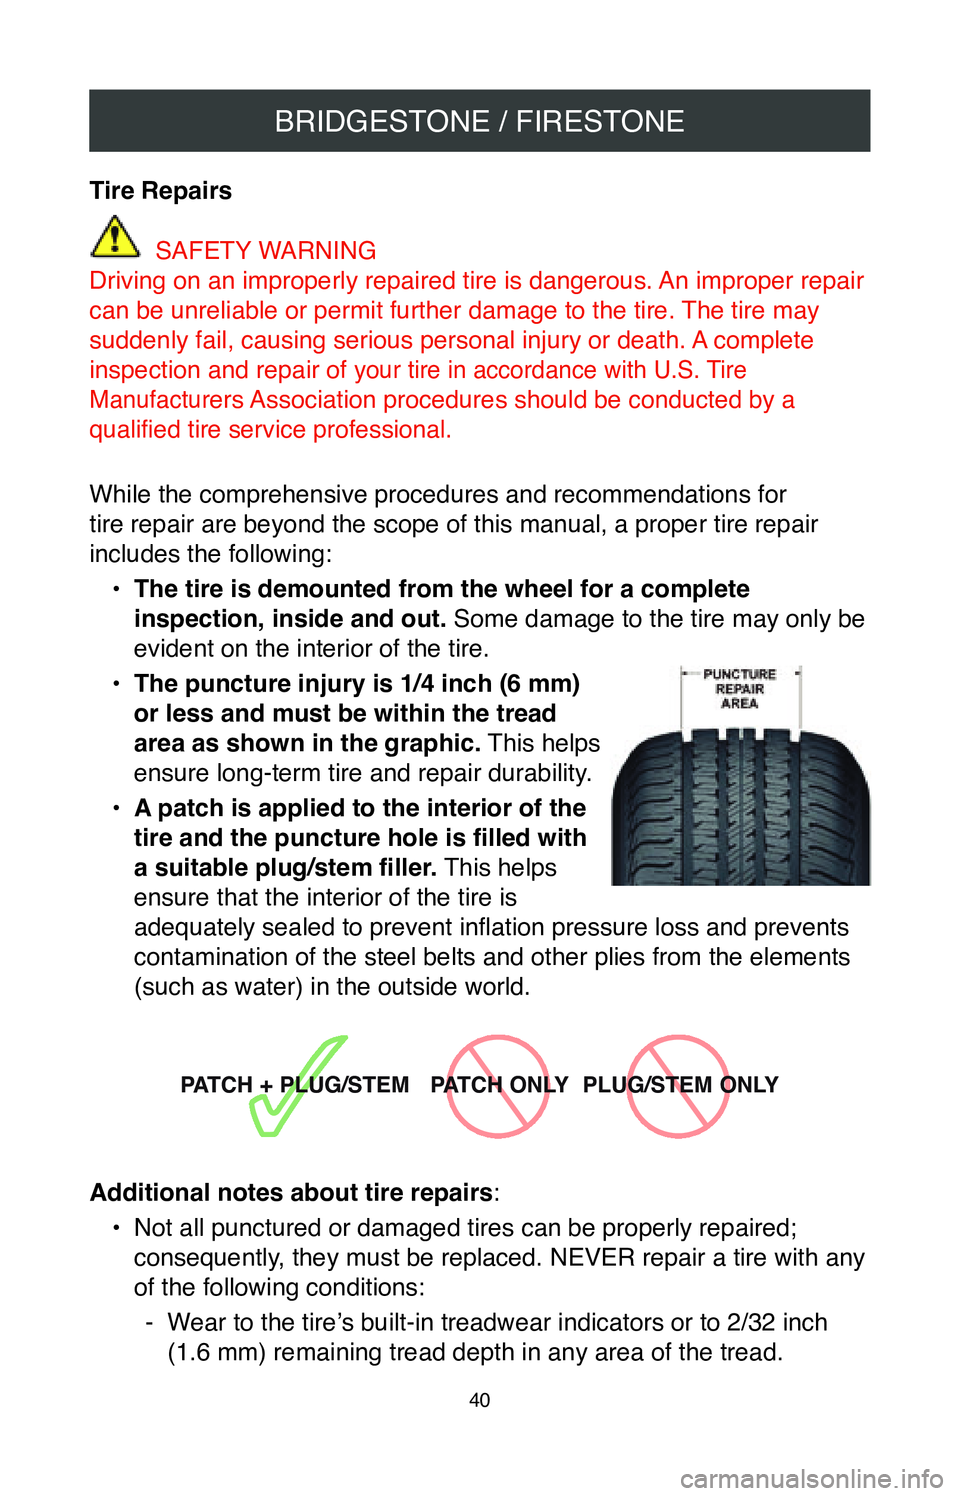 TOYOTA YARIS 2020  Warranties & Maintenance Guides (in English) BRIDGESTONE / FIRESTONE
40
Tire Repairs
 SAFETY WARNING
Driving on an improperly repaired tire is dangerous. An improper repair 
can be unreliable or permit further damage to the tire. The tire may 
s